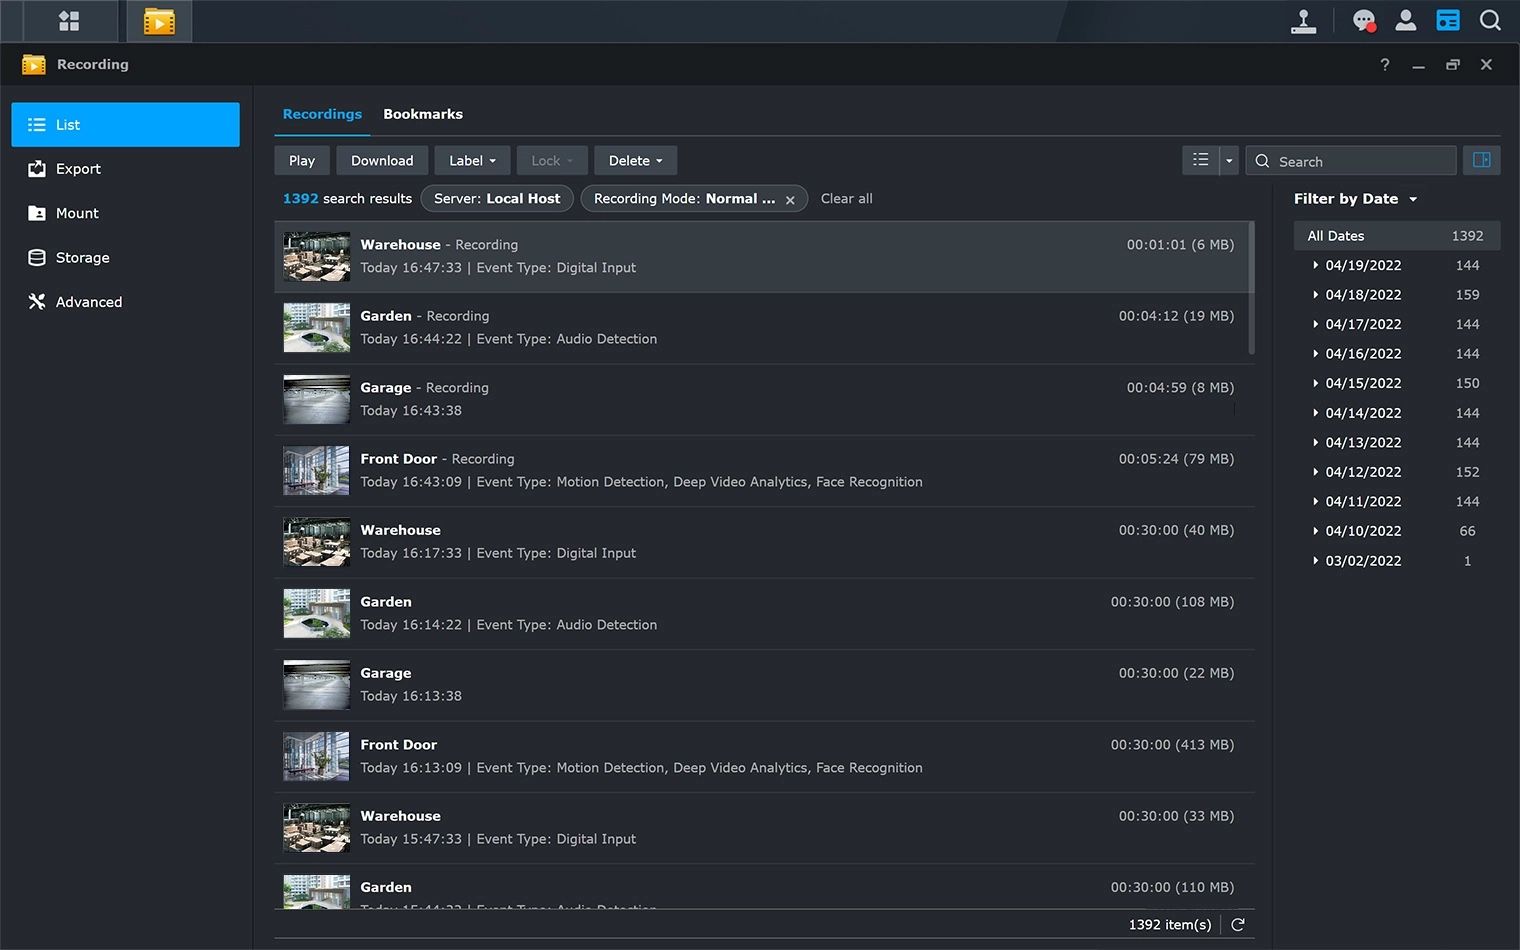 Screenshot of the Synology Surveillance Station software showing the recordings